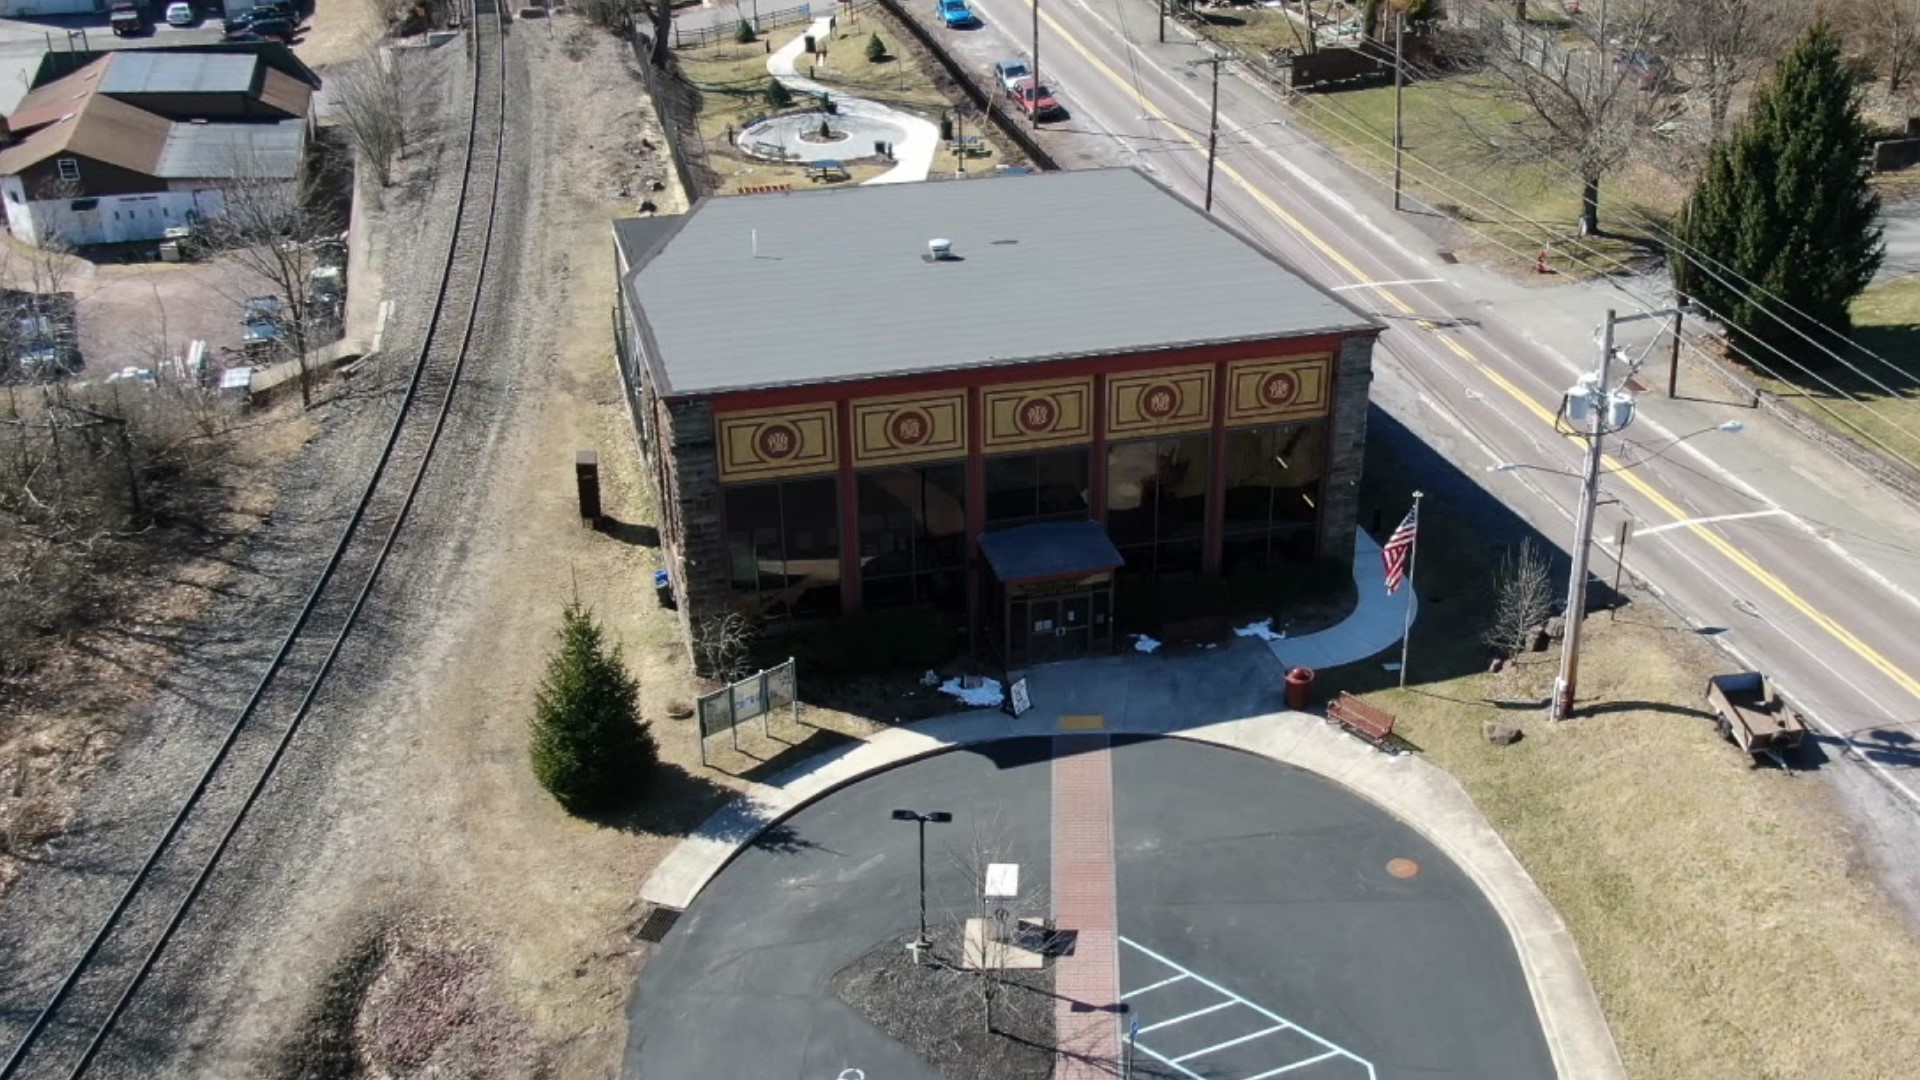 What was once home to locomotives is now a center for learning and culture in Luzerne County.